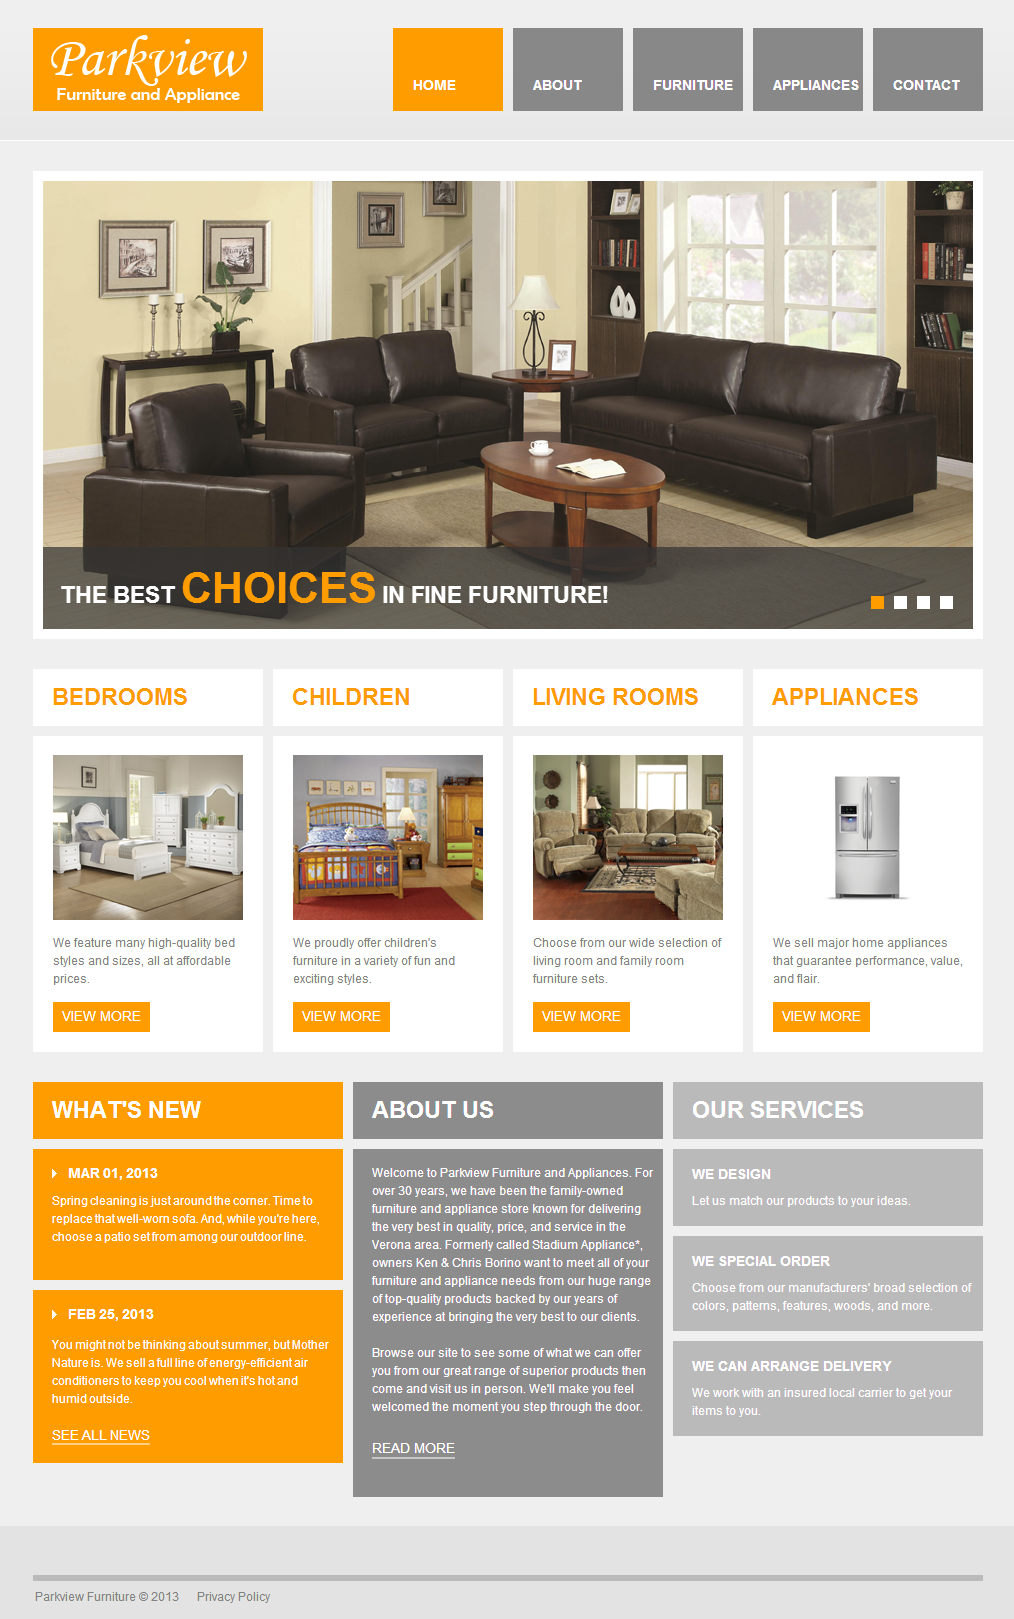 Muse Marketing thrills another client with a gorgeous new website - Parkview Furniture